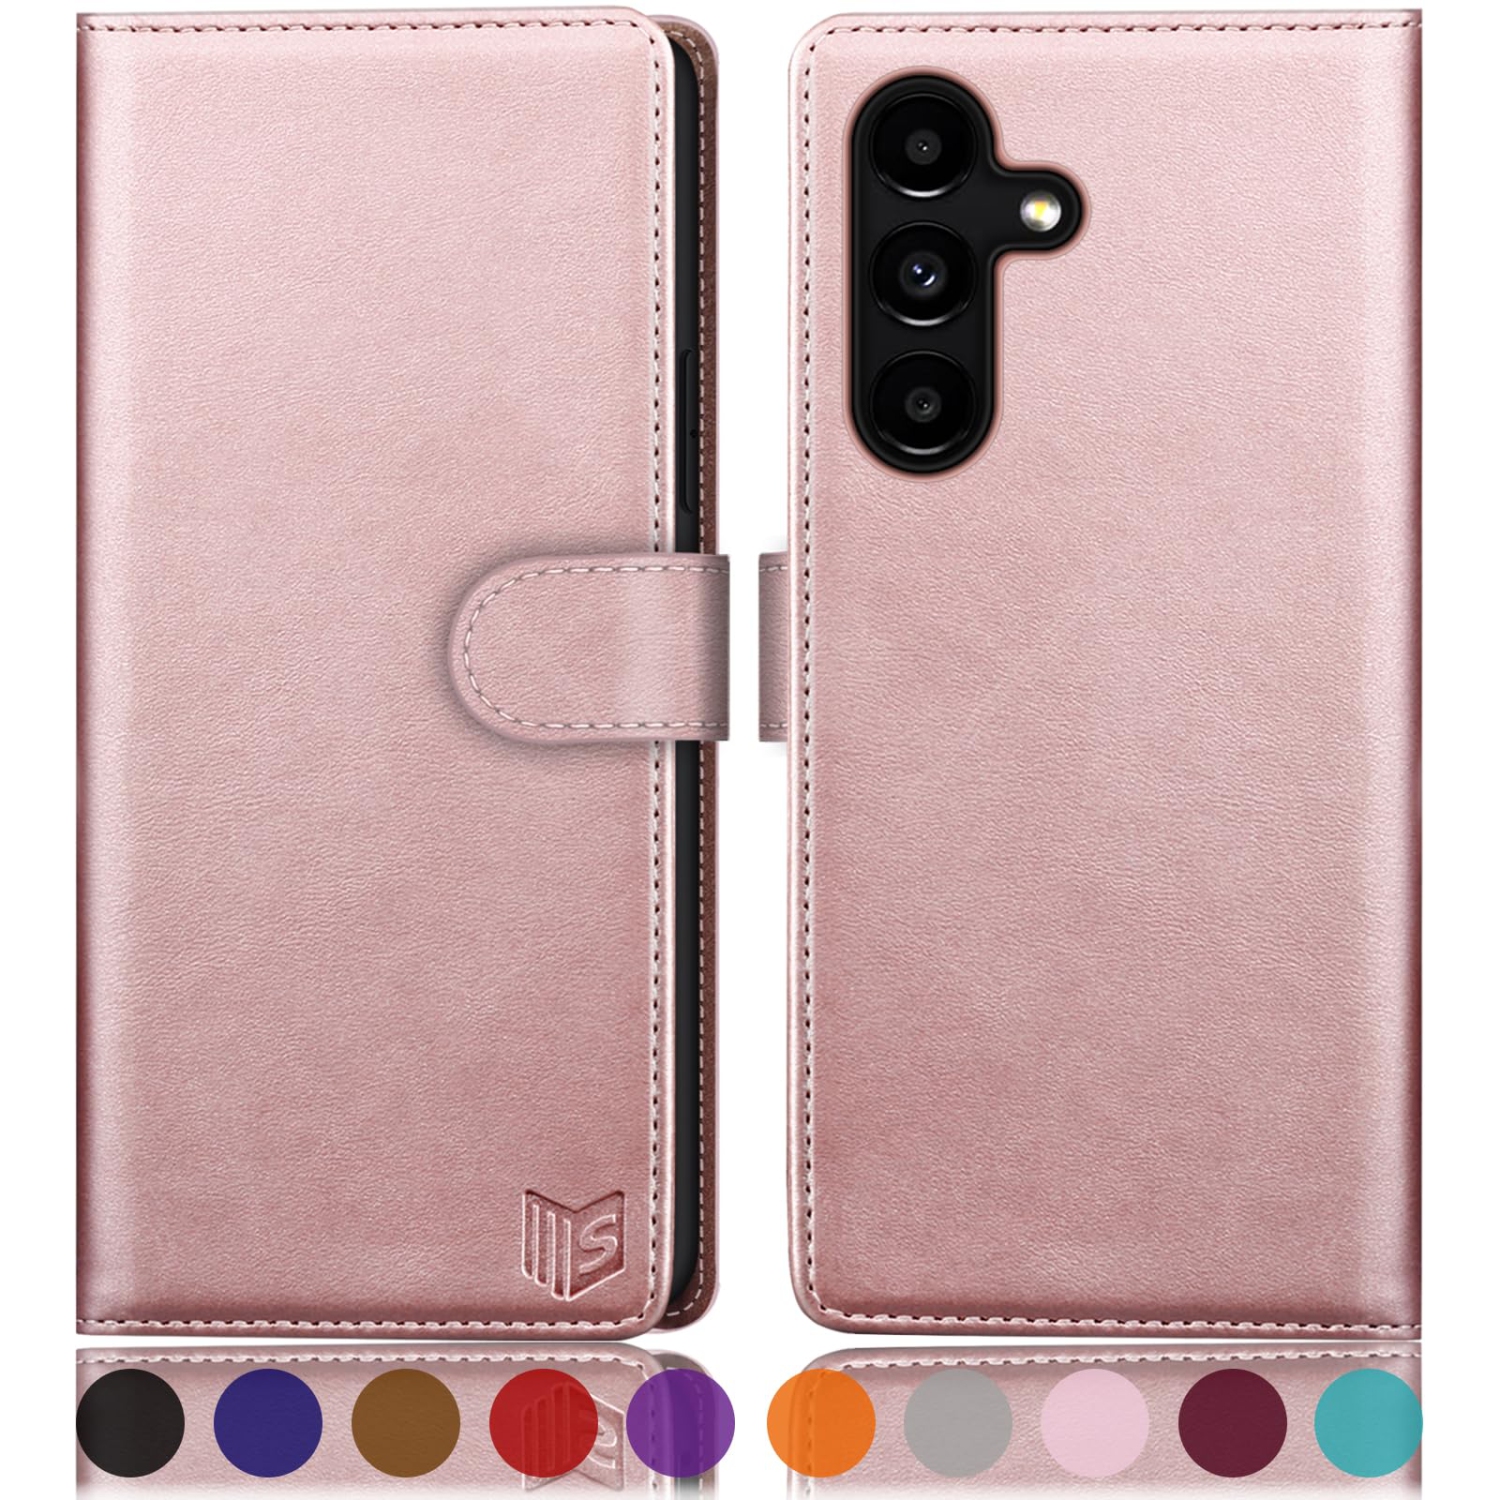 Samsung Galaxy S24 5G Wallet case with RFID Blocking Credit Card Holder,Flip Book PU Leather Protective Cover Women Men for Samsung S24 Phone case